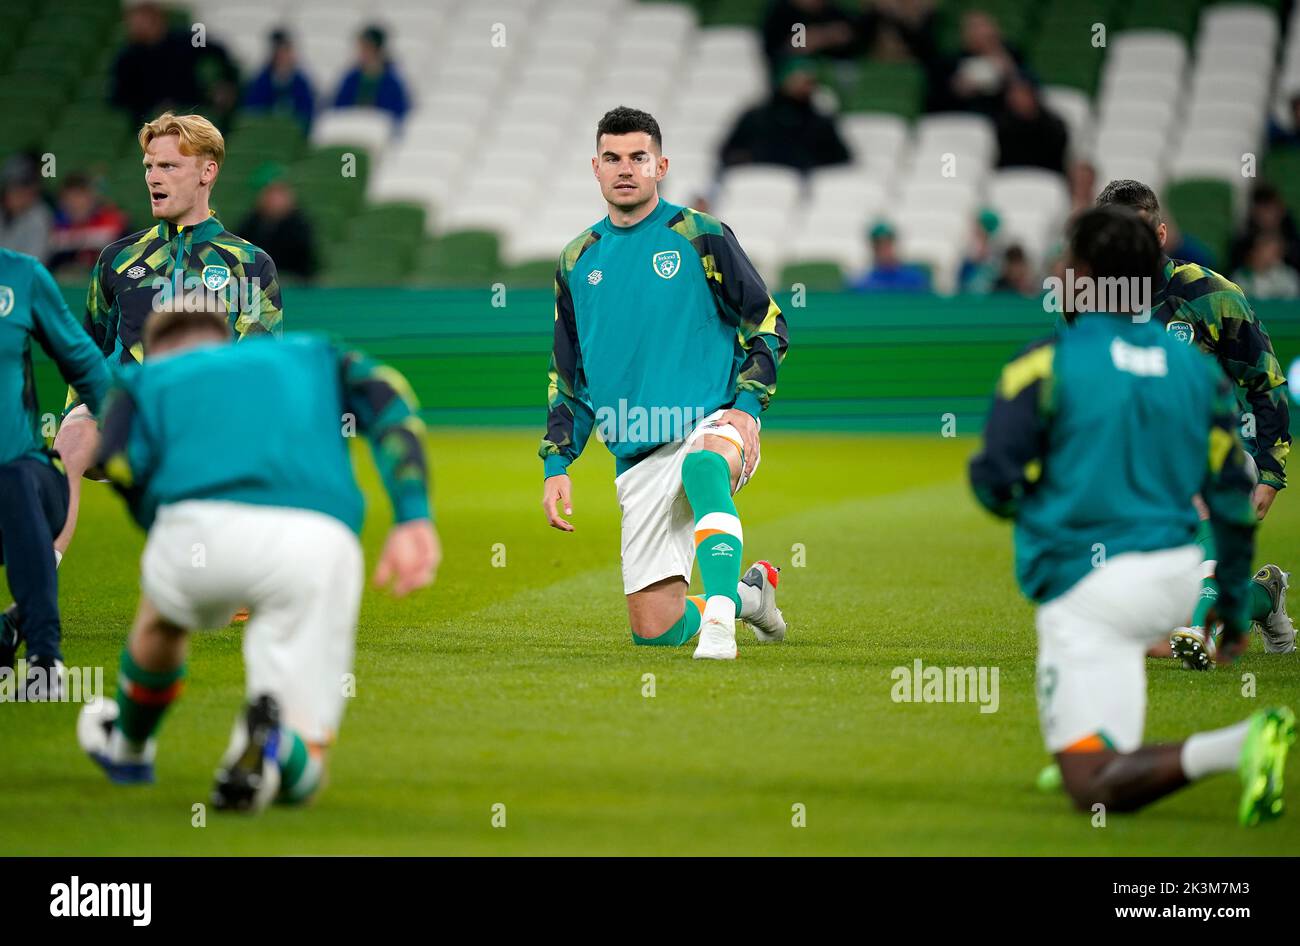 Republic of Ireland's John Egan (centre) warming up prior to kick-off before the UEFA Nations League match at the Aviva Stadium in Dublin, Ireland. Picture date: Tuesday September 27, 2022. Stock Photo